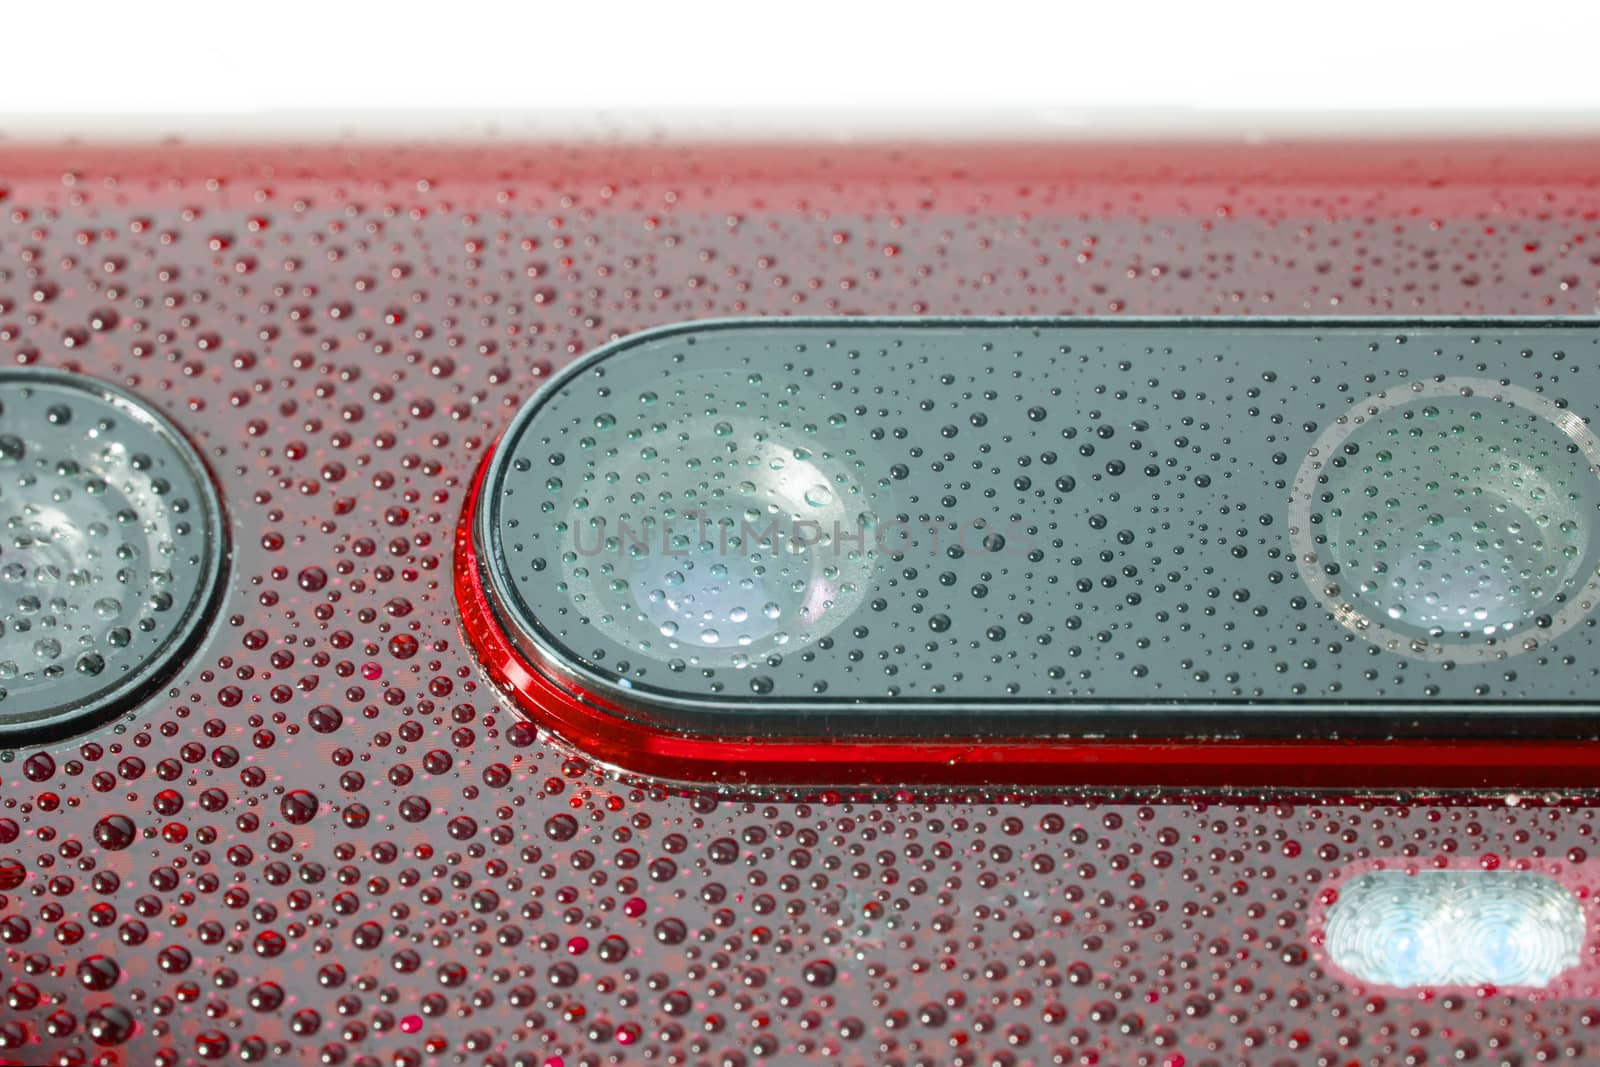 red phone camera lens covered with small water drops - close-up with selective focus and blur by z1b